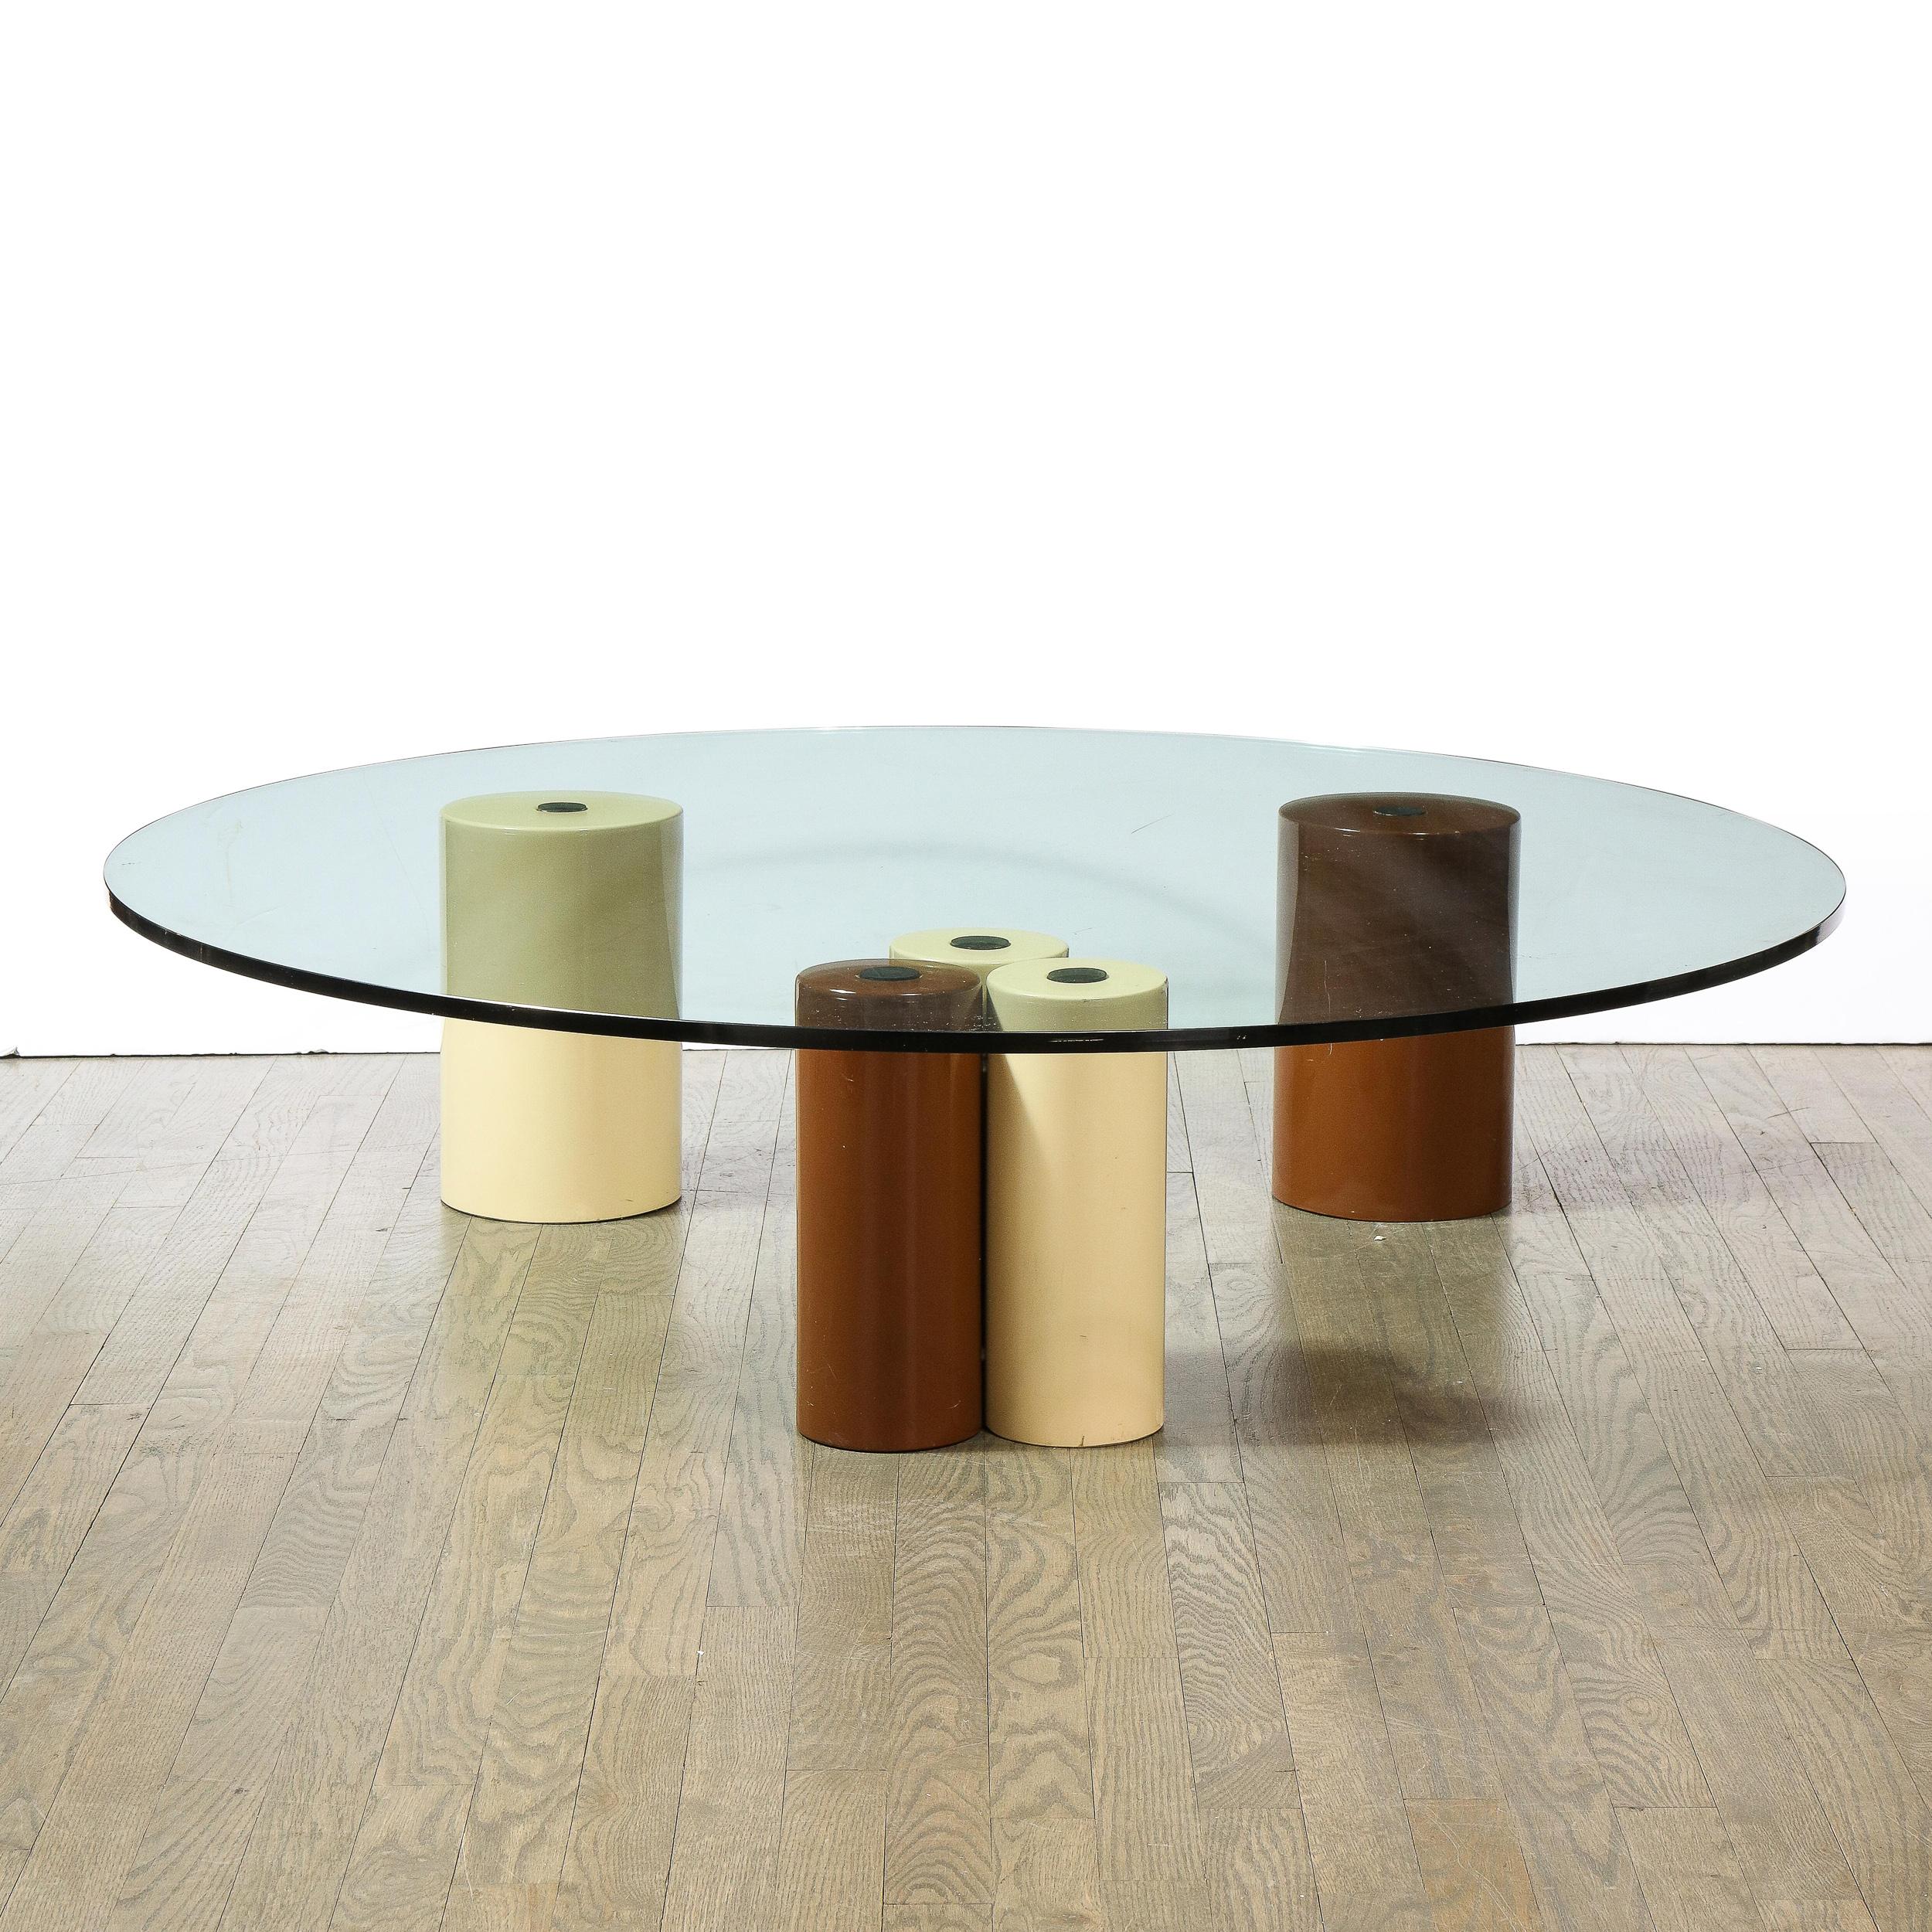 This refined and sophisticated modernist cocktail table was realized by the esteemed maker Saporiti in Italy, circa 1980. It features five cylindrical pillars- three in cream and two in ochre- that support a circular glass top. With its